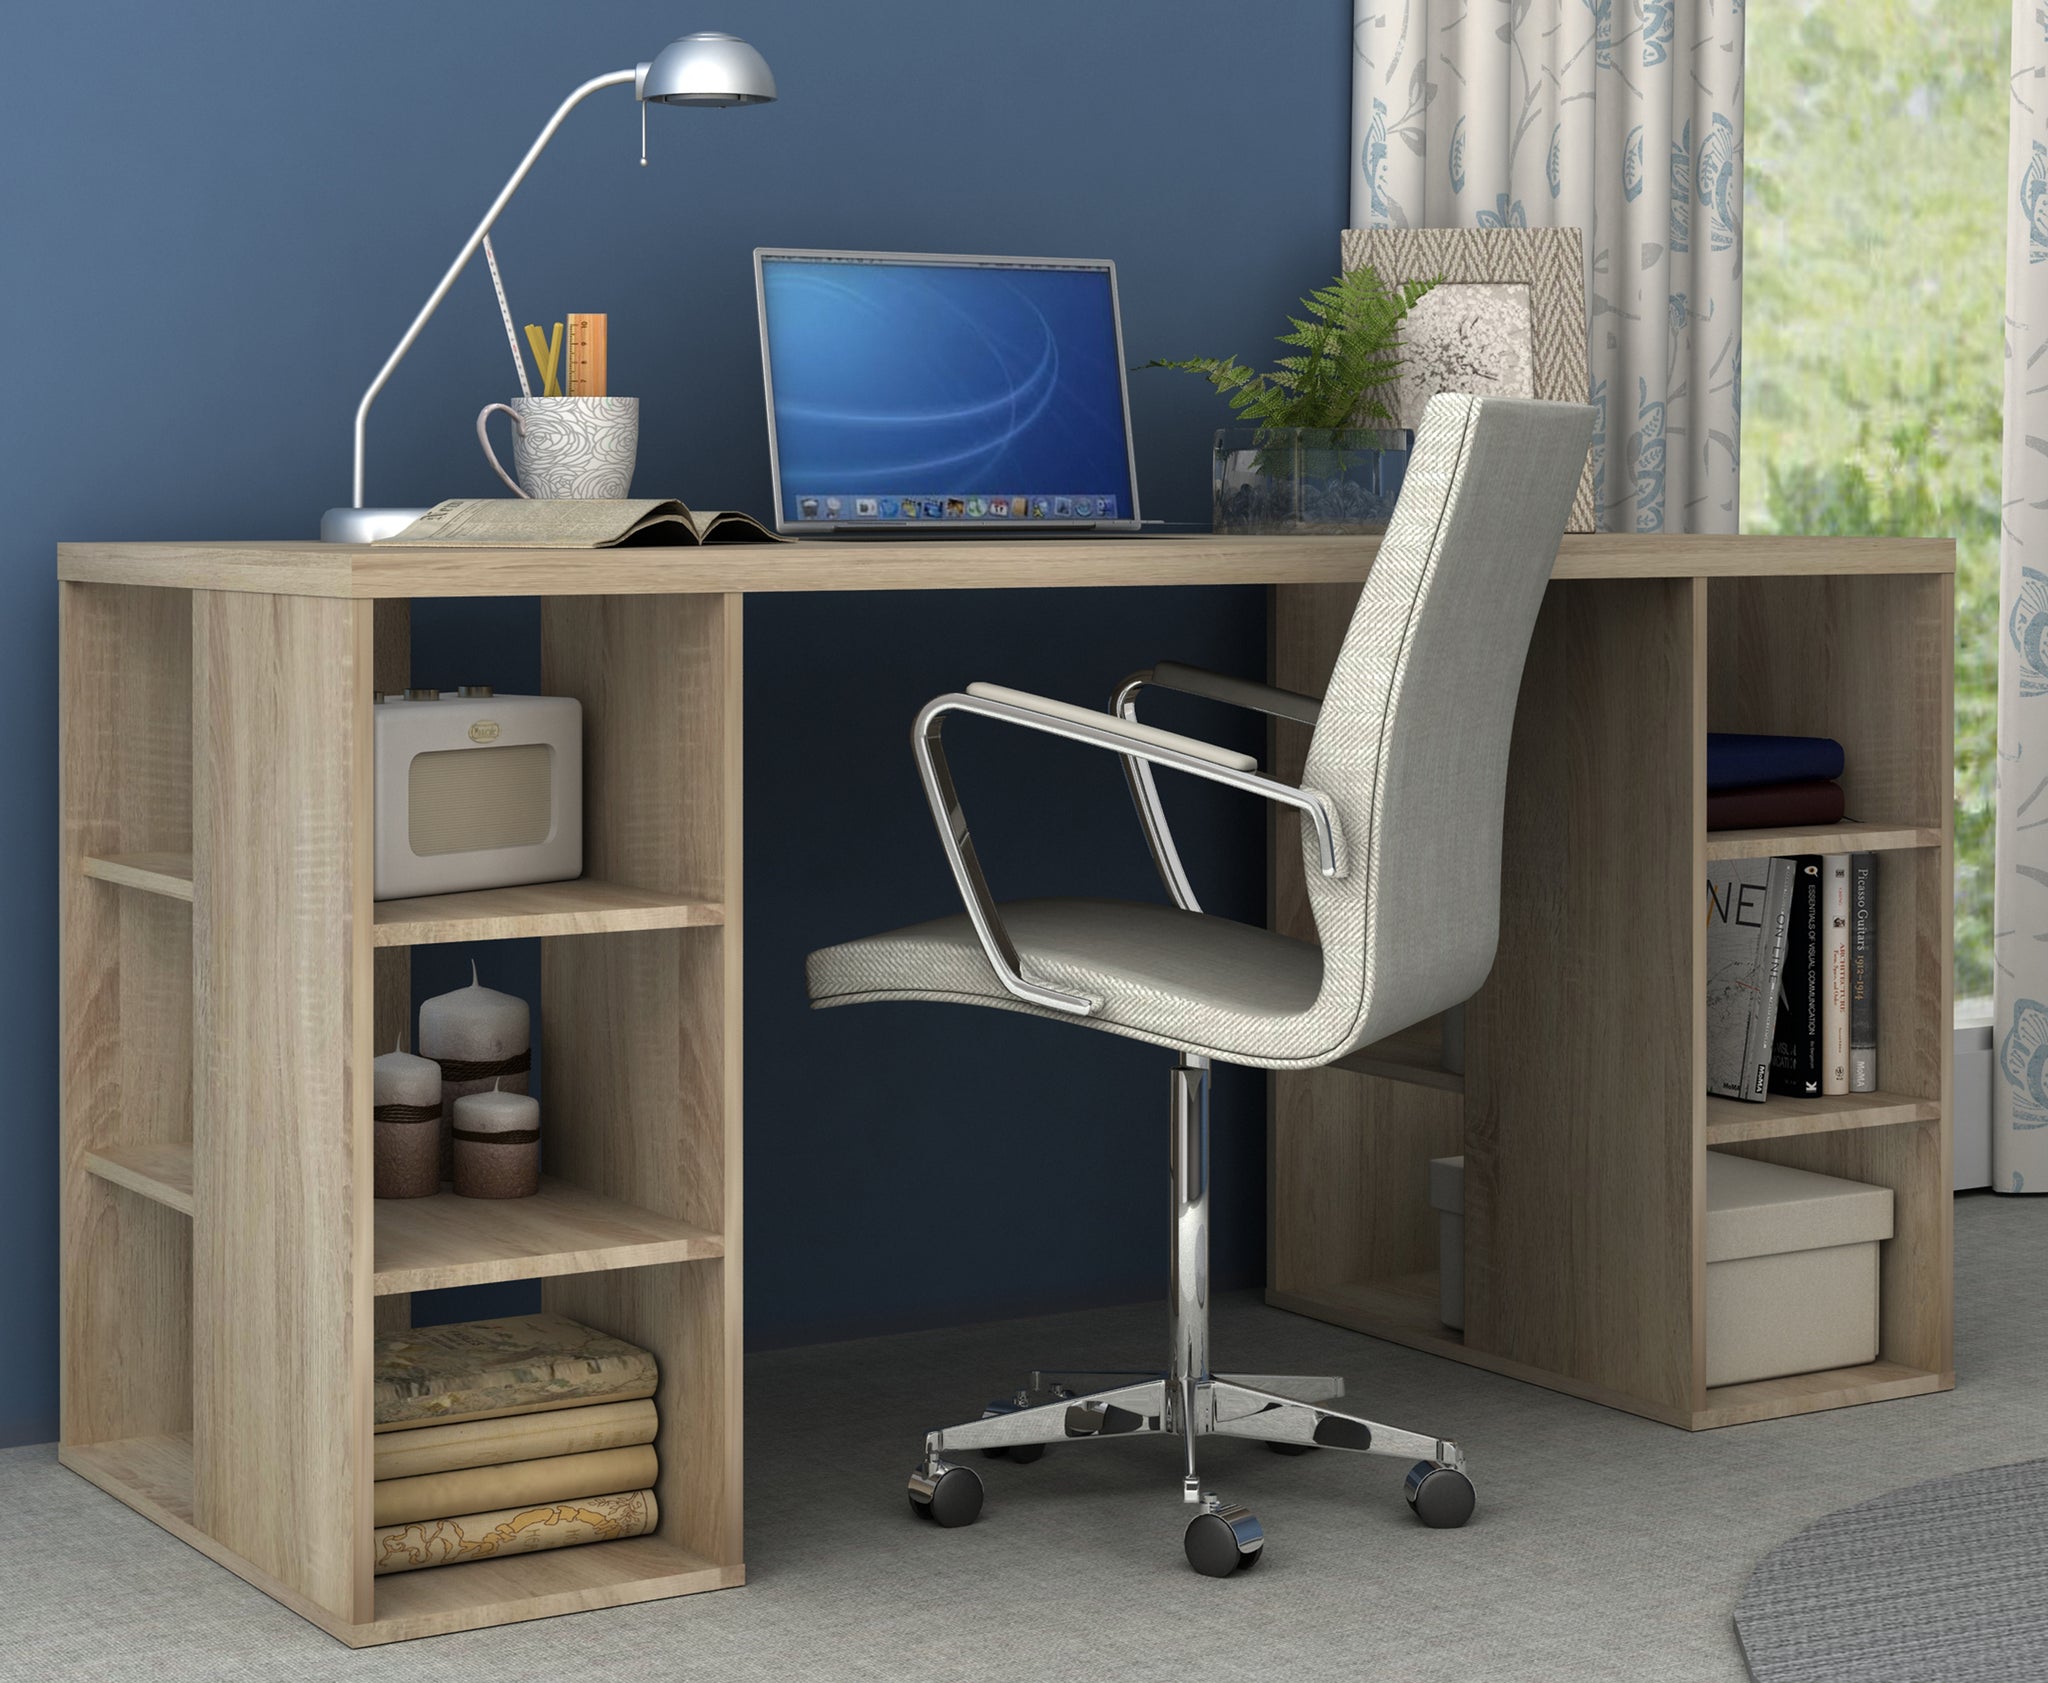 Bloc Modern Home Office Computer Study Desk With Book Storage